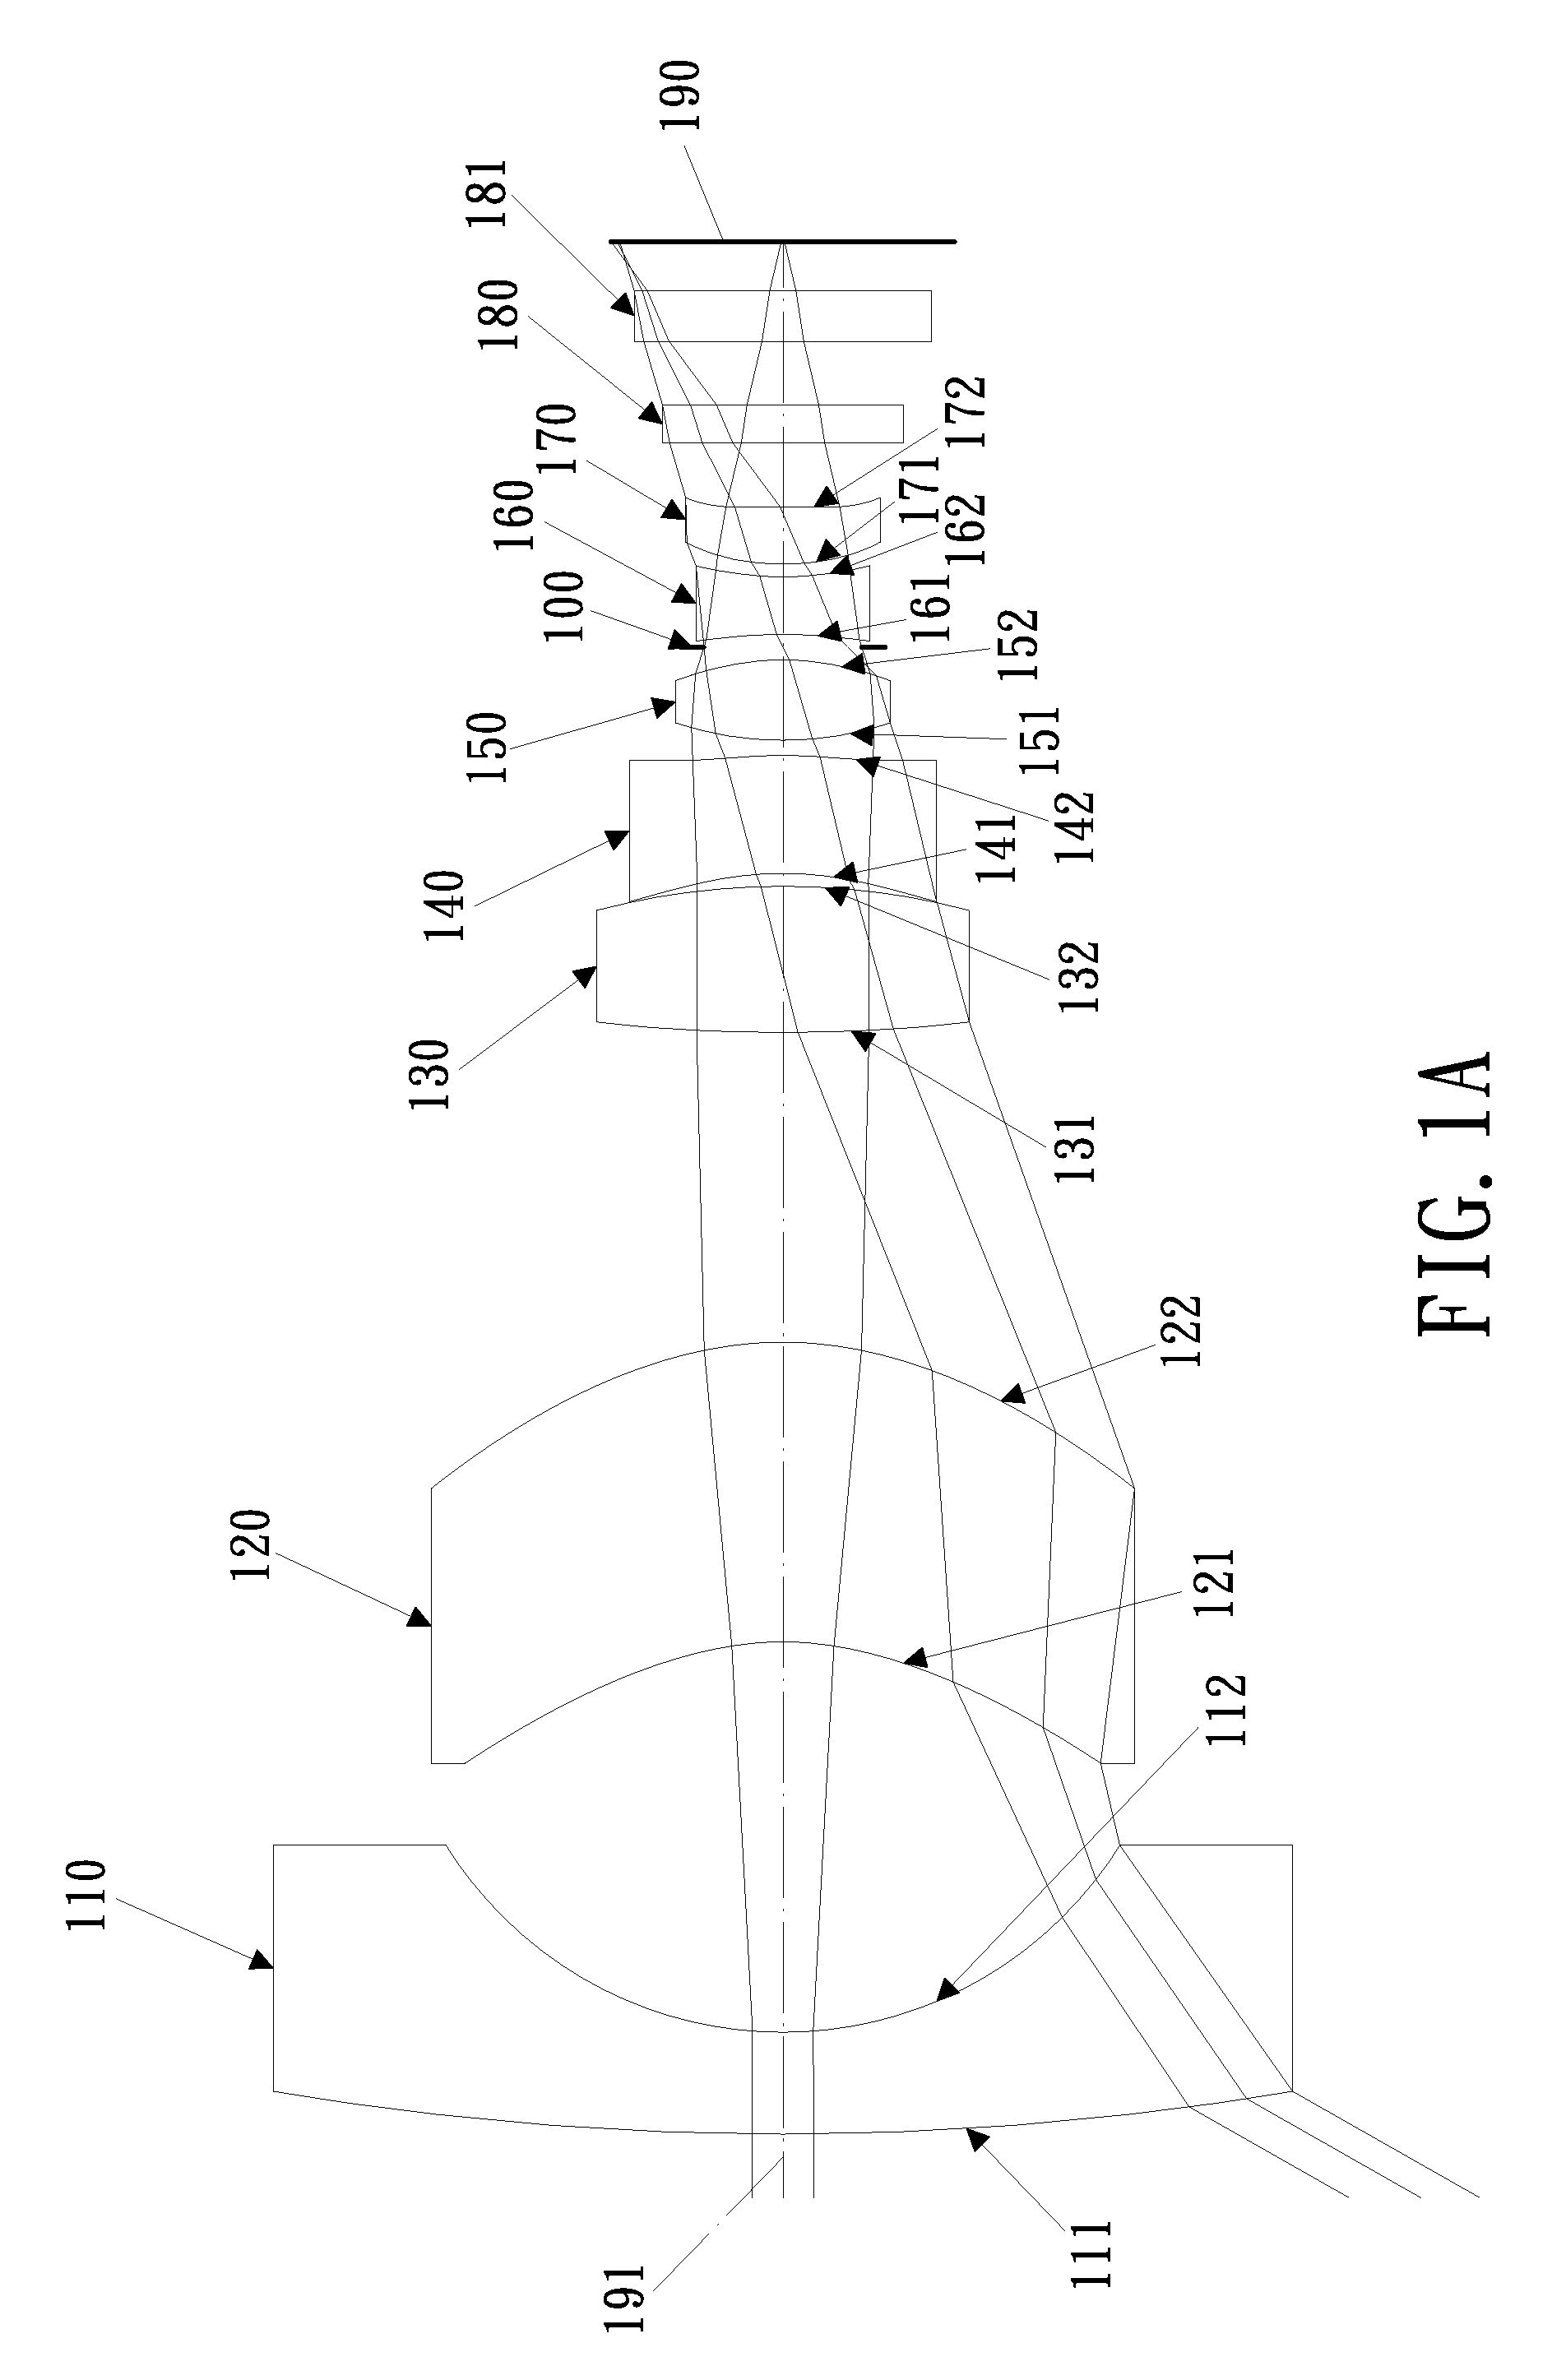 Optical lens system with a wide field of view